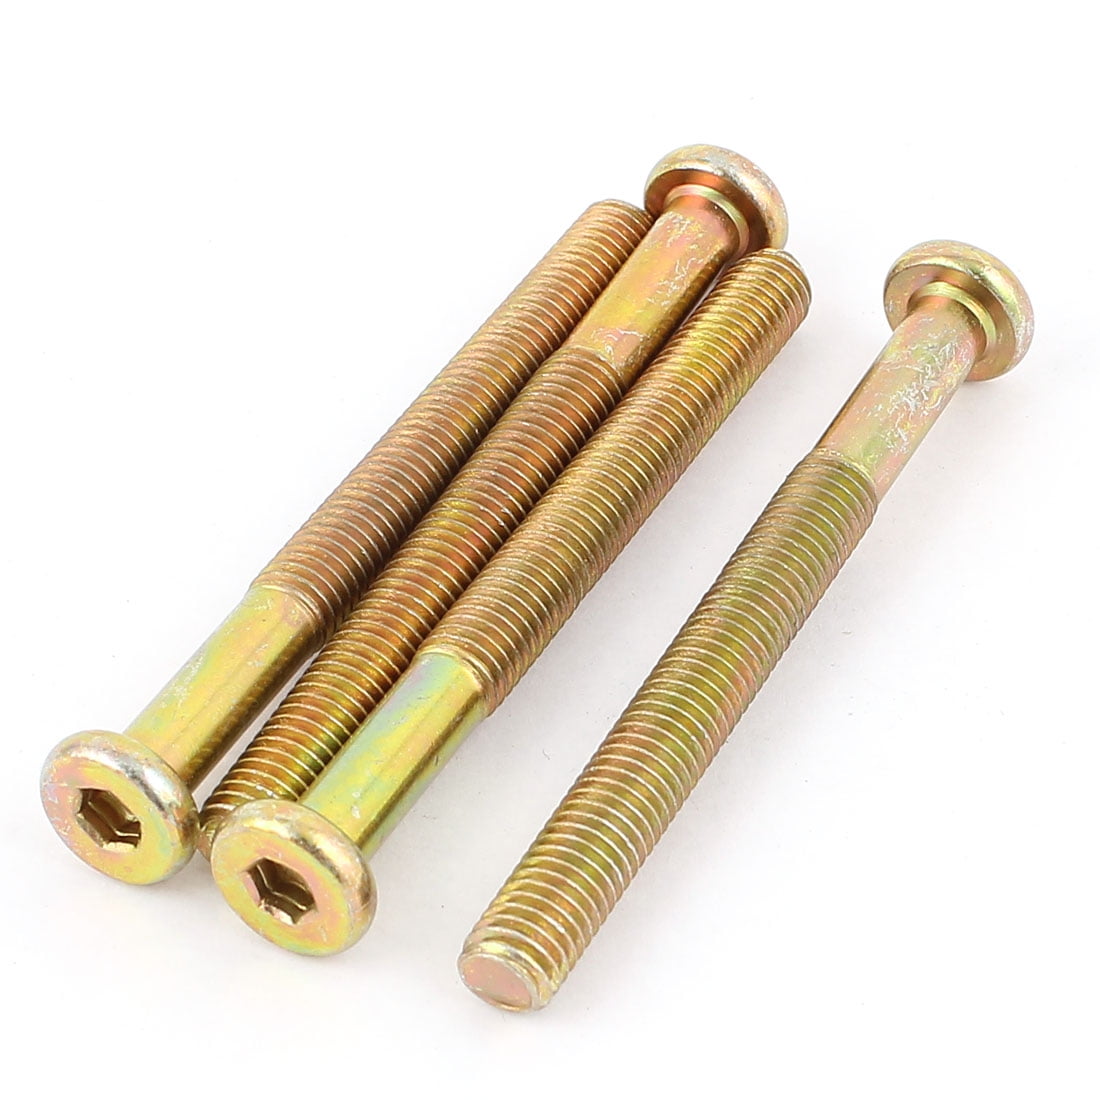 8mm x 2" MIRROR SCREWS & DOMES Long/Strong Brass Plated Head Cap Mounting/Fixing 